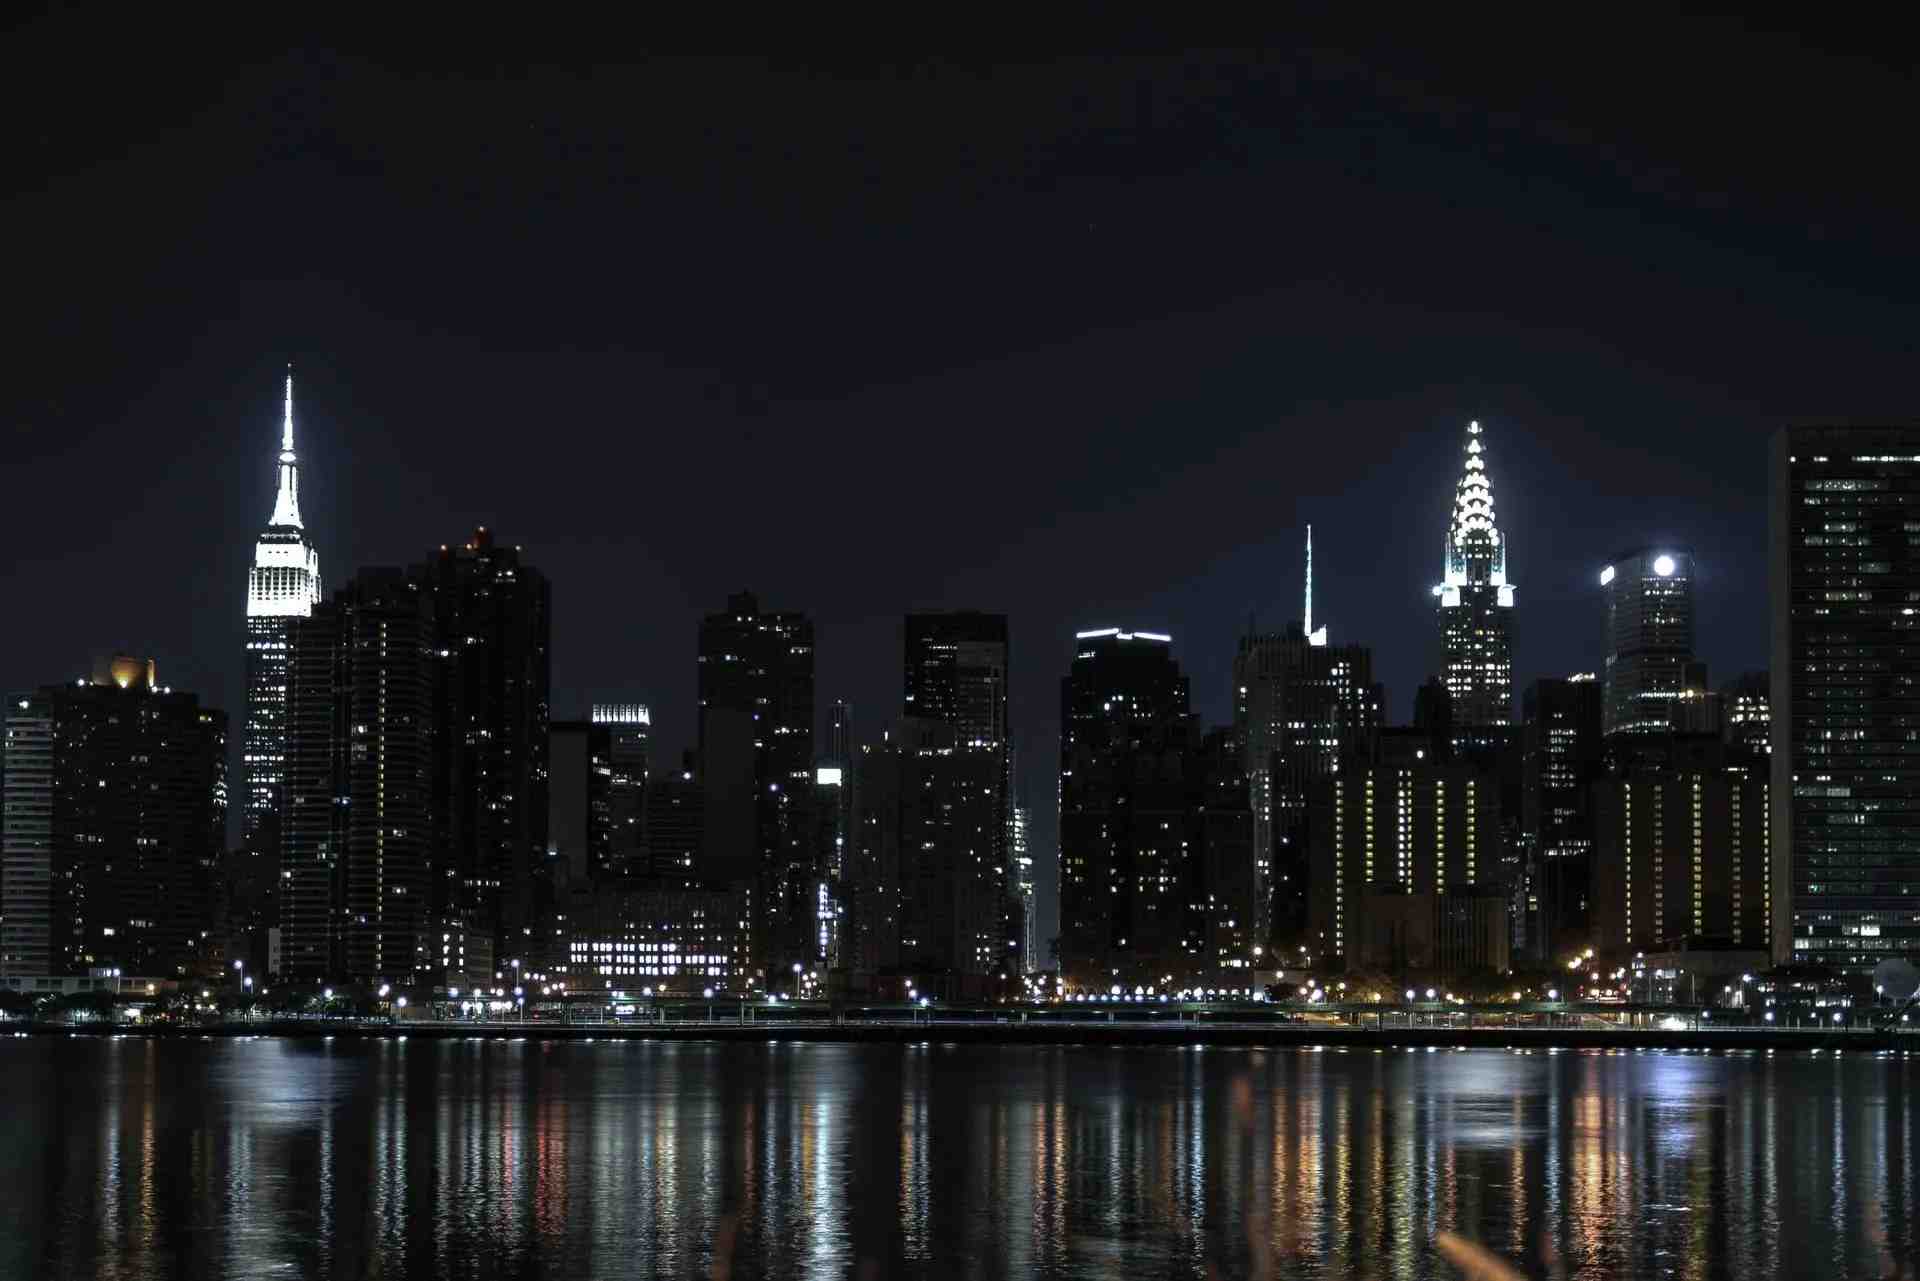 The night view of the illuminated Chrysler Building is something to see.